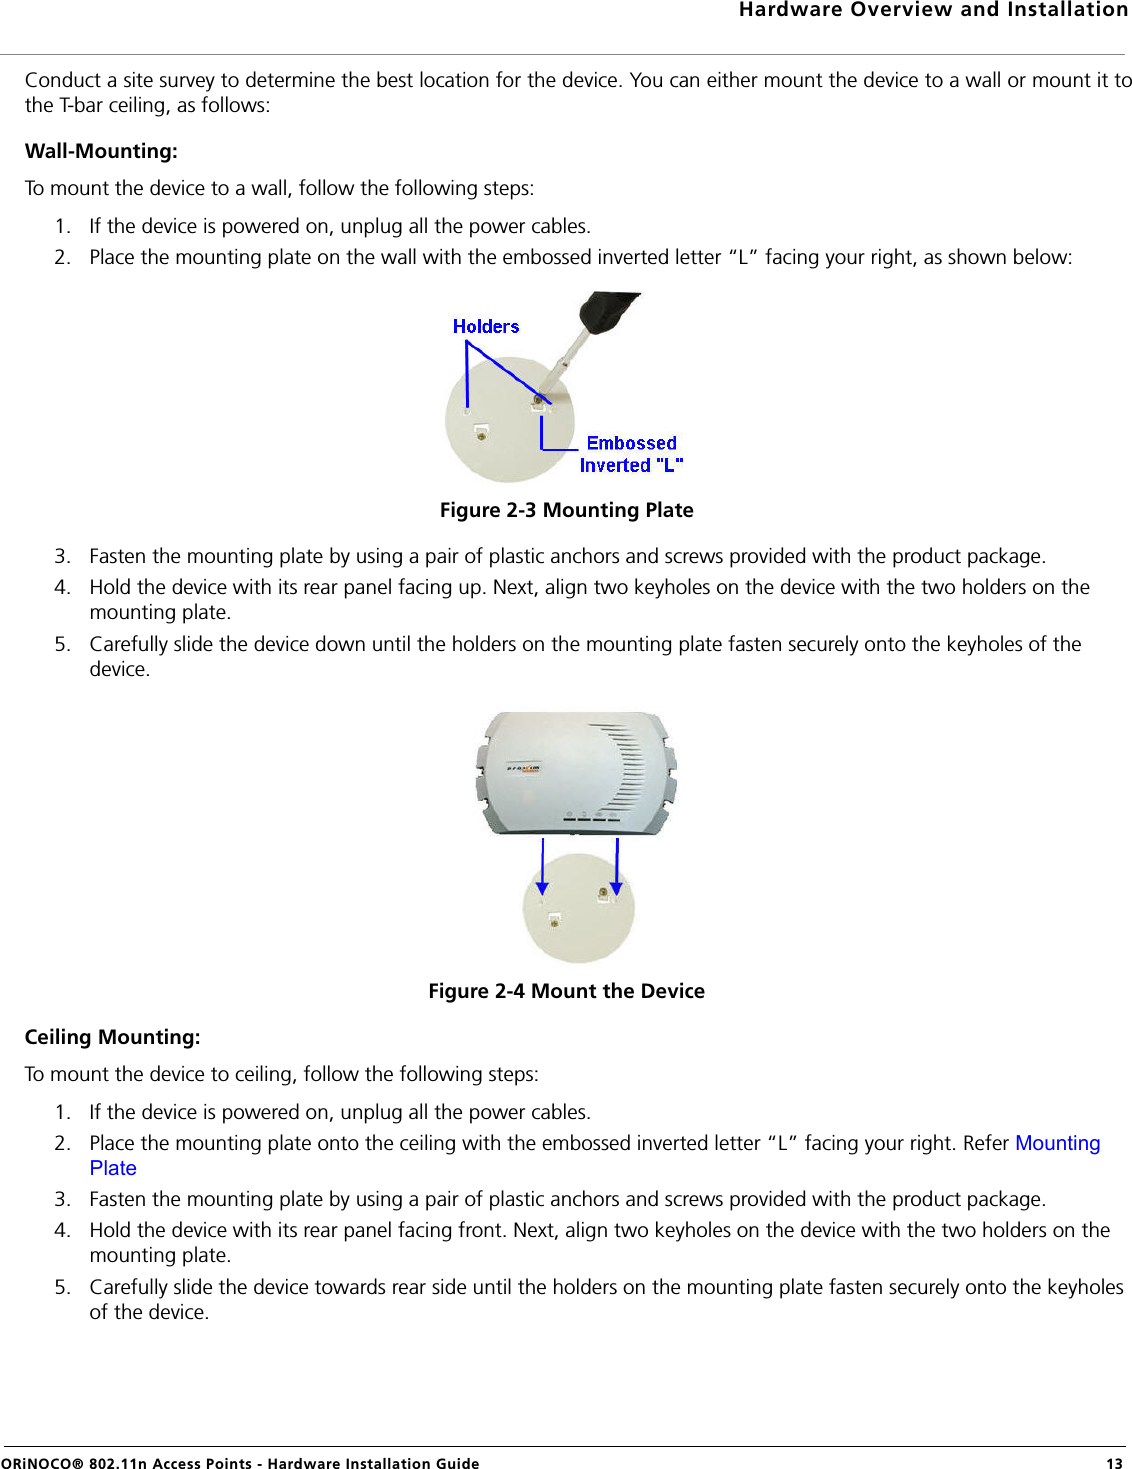 Hardware Overview and InstallationORiNOCO® 802.11n Access Points - Hardware Installation Guide  13Conduct a site survey to determine the best location for the device. You can either mount the device to a wall or mount it tothe T-bar ceiling, as follows:Wall-Mounting:To mount the device to a wall, follow the following steps:1. If the device is powered on, unplug all the power cables.2. Place the mounting plate on the wall with the embossed inverted letter “L” facing your right, as shown below:Figure 2-3 Mounting Plate3. Fasten the mounting plate by using a pair of plastic anchors and screws provided with the product package.4. Hold the device with its rear panel facing up. Next, align two keyholes on the device with the two holders on the mounting plate. 5. Carefully slide the device down until the holders on the mounting plate fasten securely onto the keyholes of the device.Figure 2-4 Mount the DeviceCeiling Mounting:To mount the device to ceiling, follow the following steps:1. If the device is powered on, unplug all the power cables.2. Place the mounting plate onto the ceiling with the embossed inverted letter “L” facing your right. Refer Mounting Plate3. Fasten the mounting plate by using a pair of plastic anchors and screws provided with the product package.4. Hold the device with its rear panel facing front. Next, align two keyholes on the device with the two holders on the mounting plate. 5. Carefully slide the device towards rear side until the holders on the mounting plate fasten securely onto the keyholes of the device.